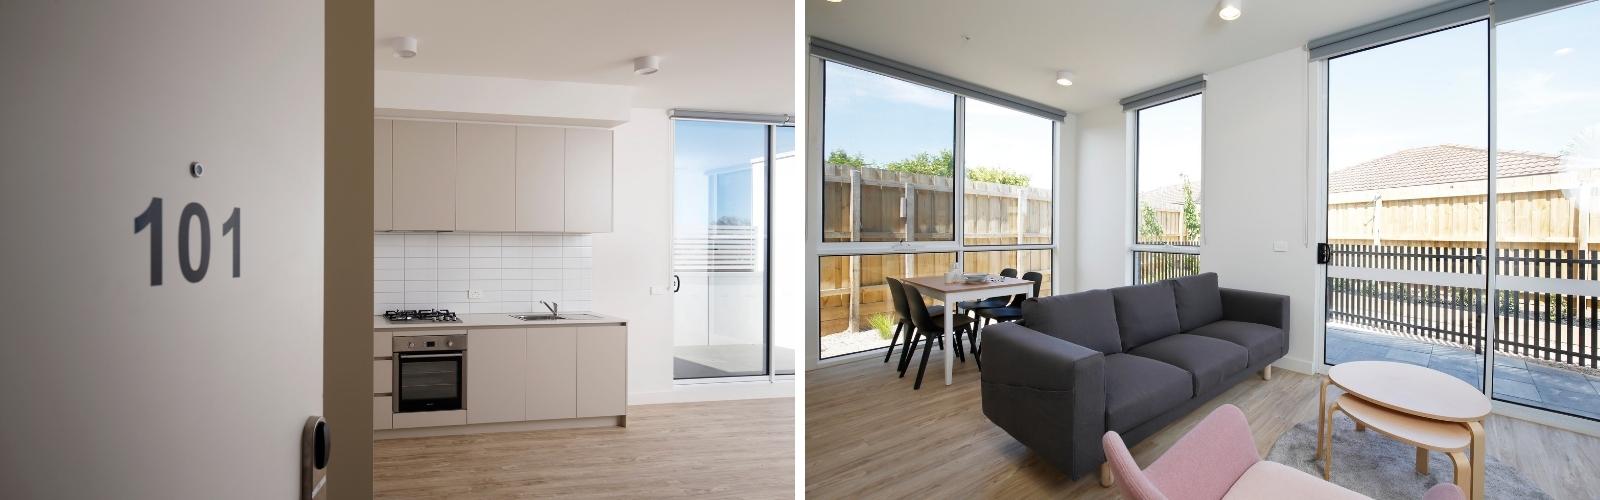 Photos of the interior of the self-contained apartments at the Market Road property in Werribee